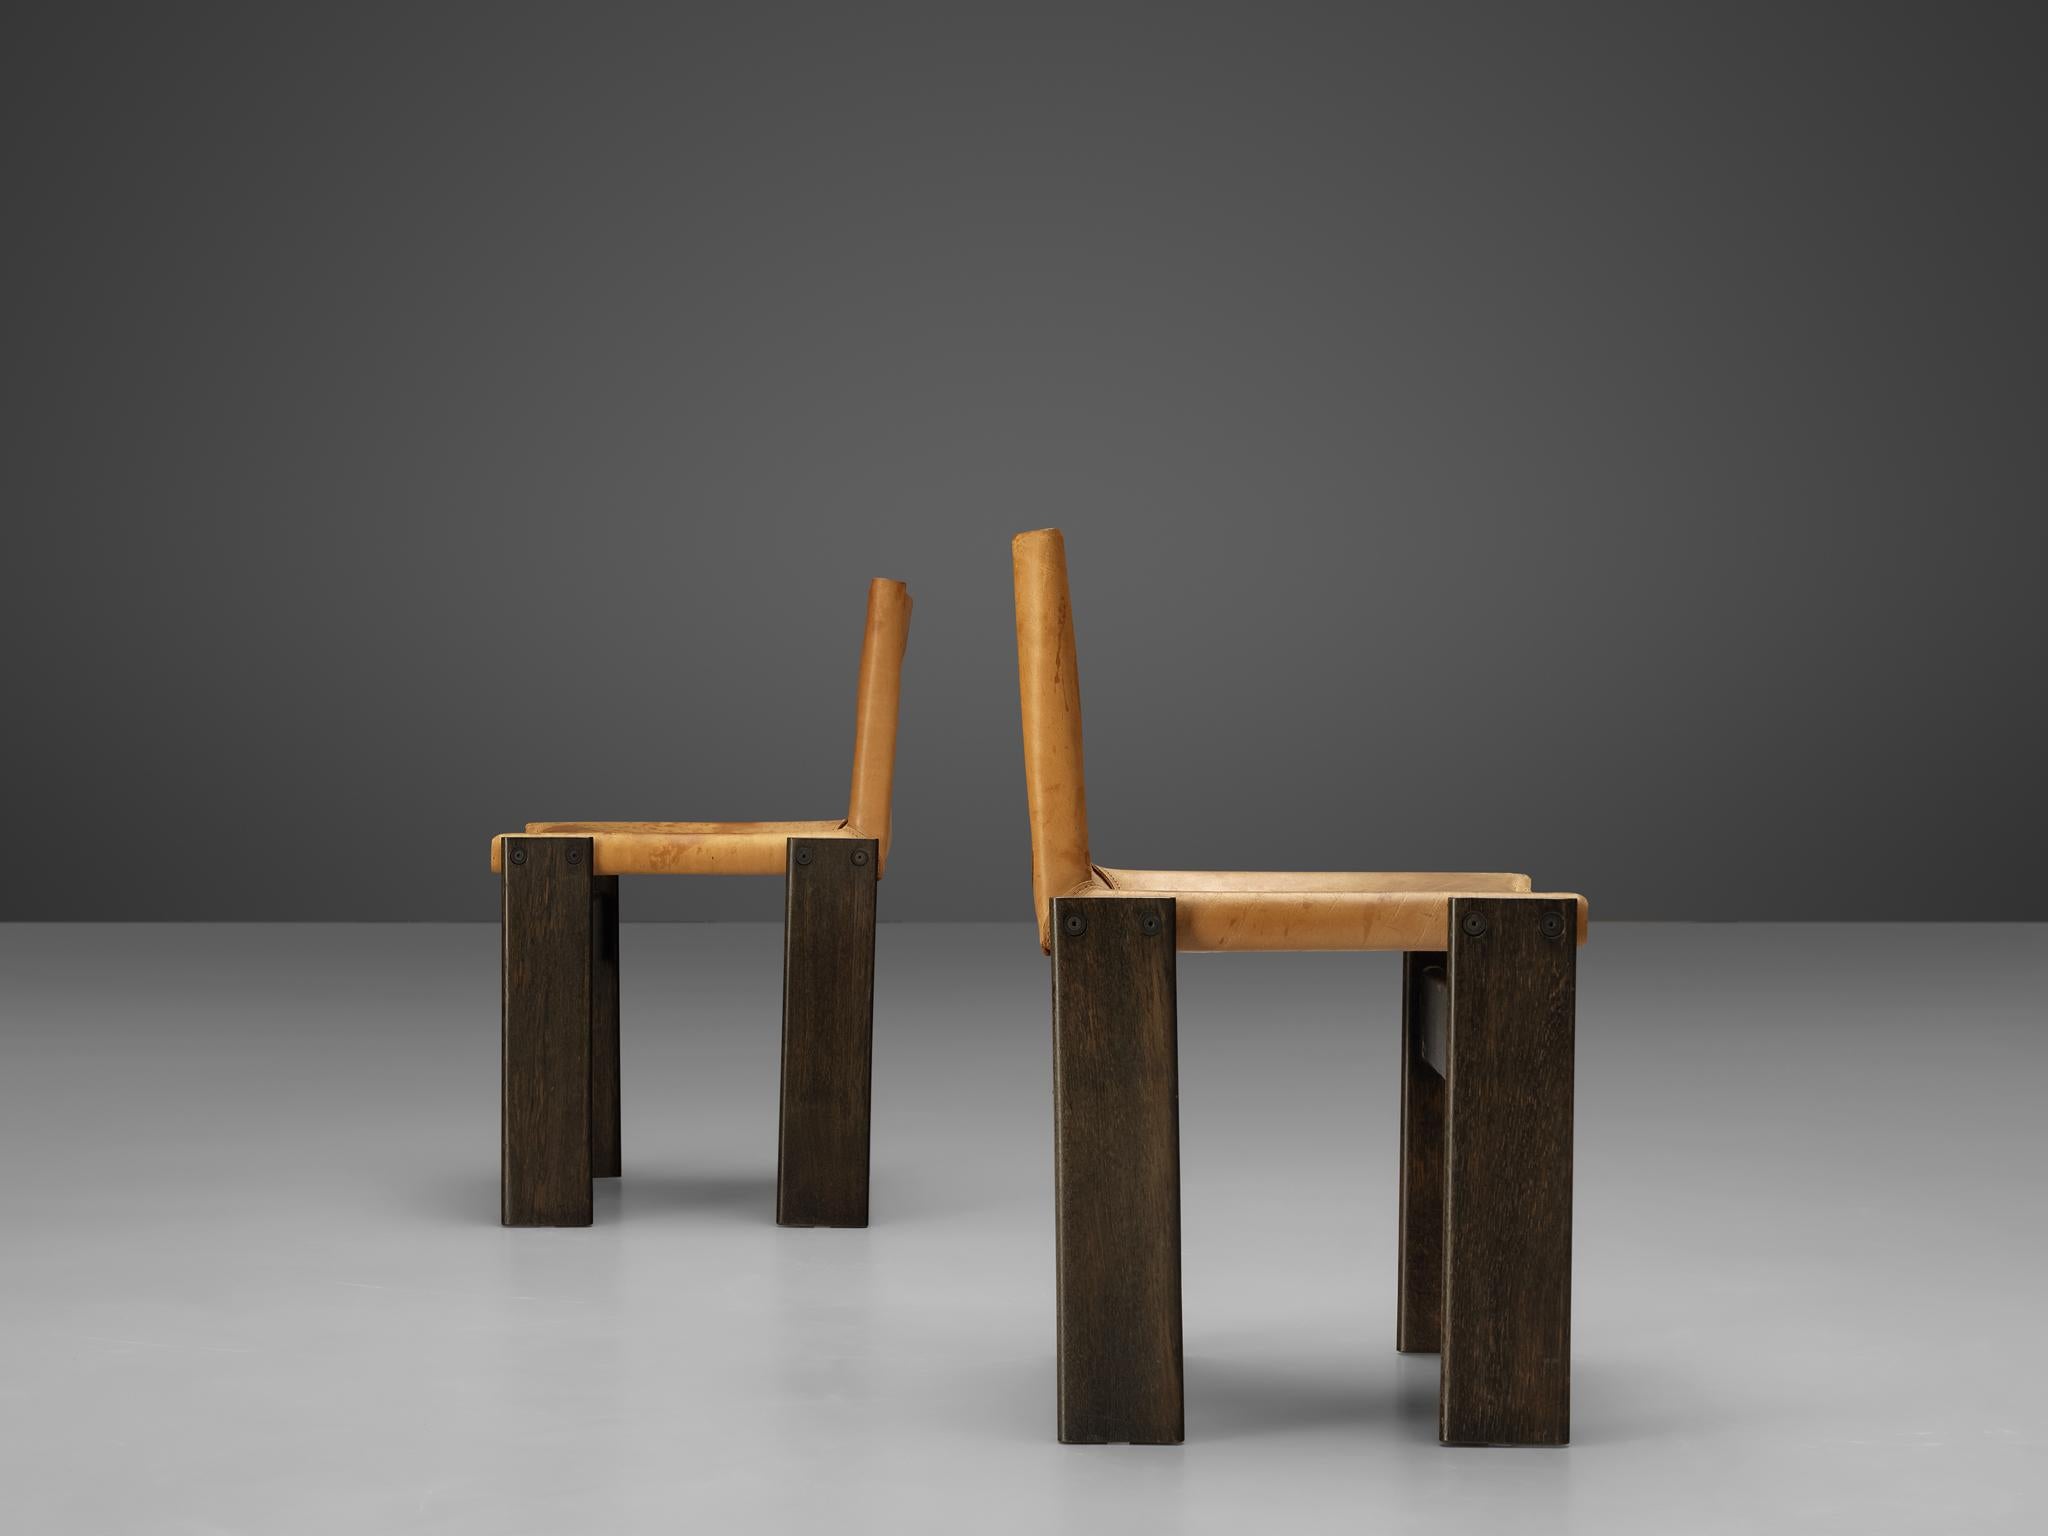 Afra & Tobia Scarpa 'Monk' Chairs in Cognac Leather 1